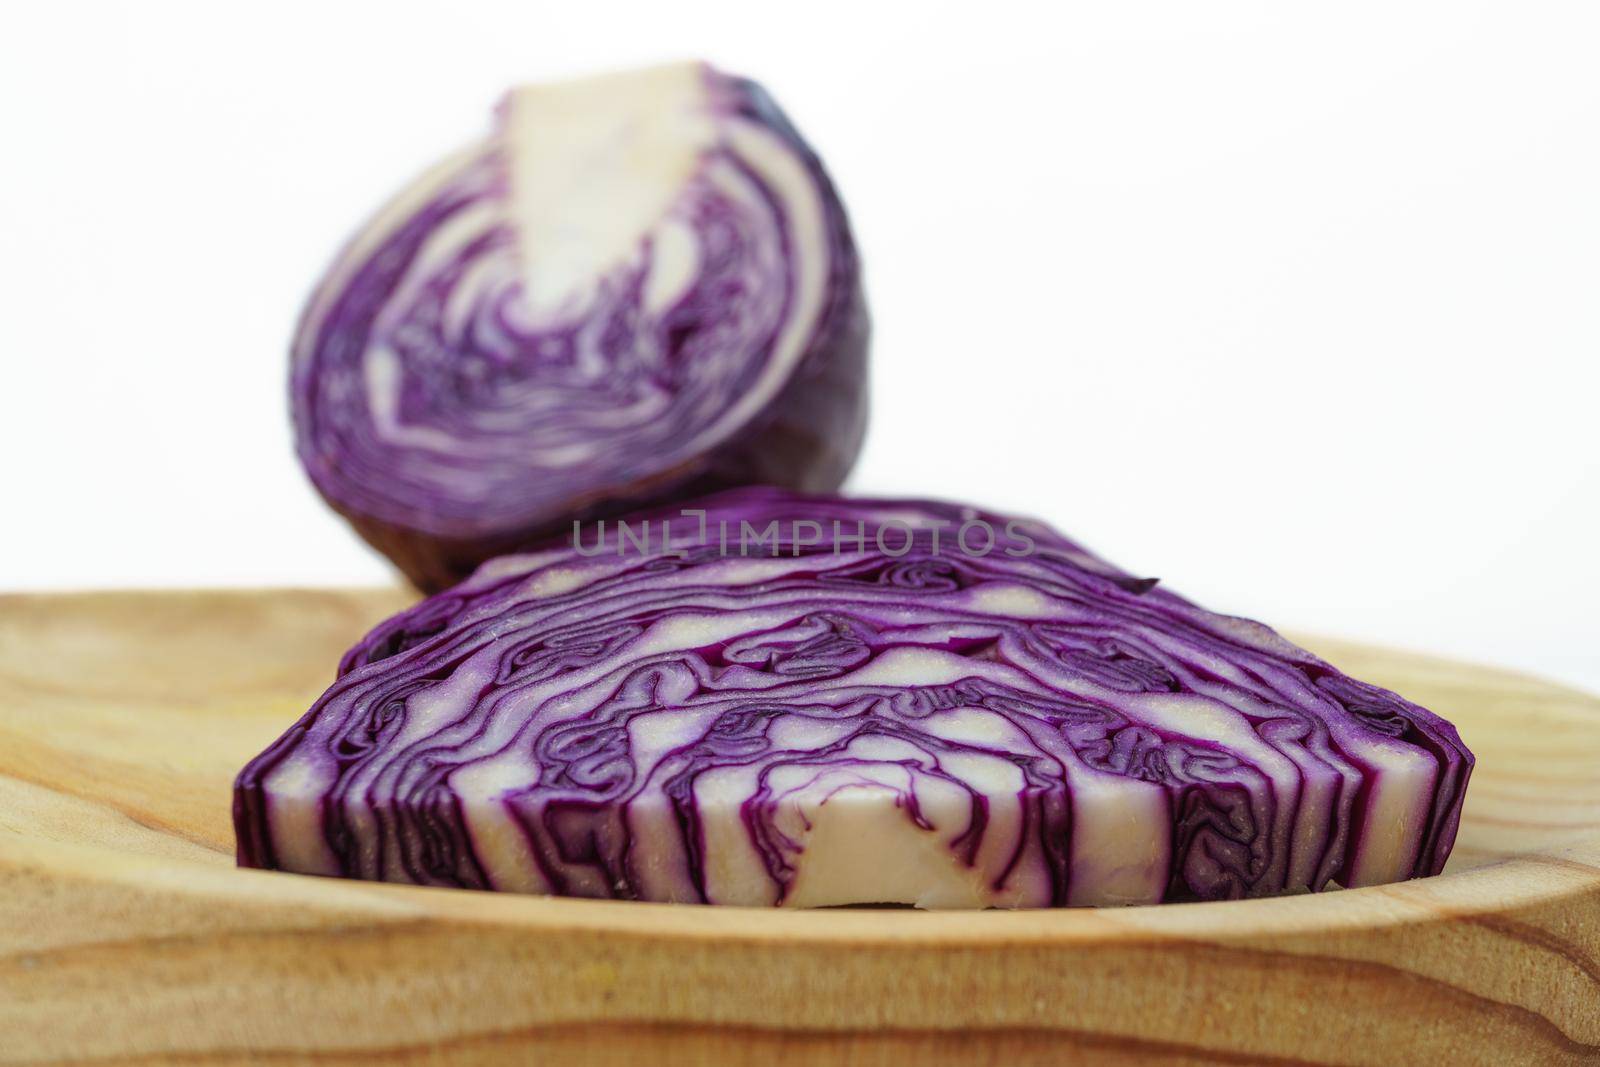 purple cabbage or red cabbage isolated on white background